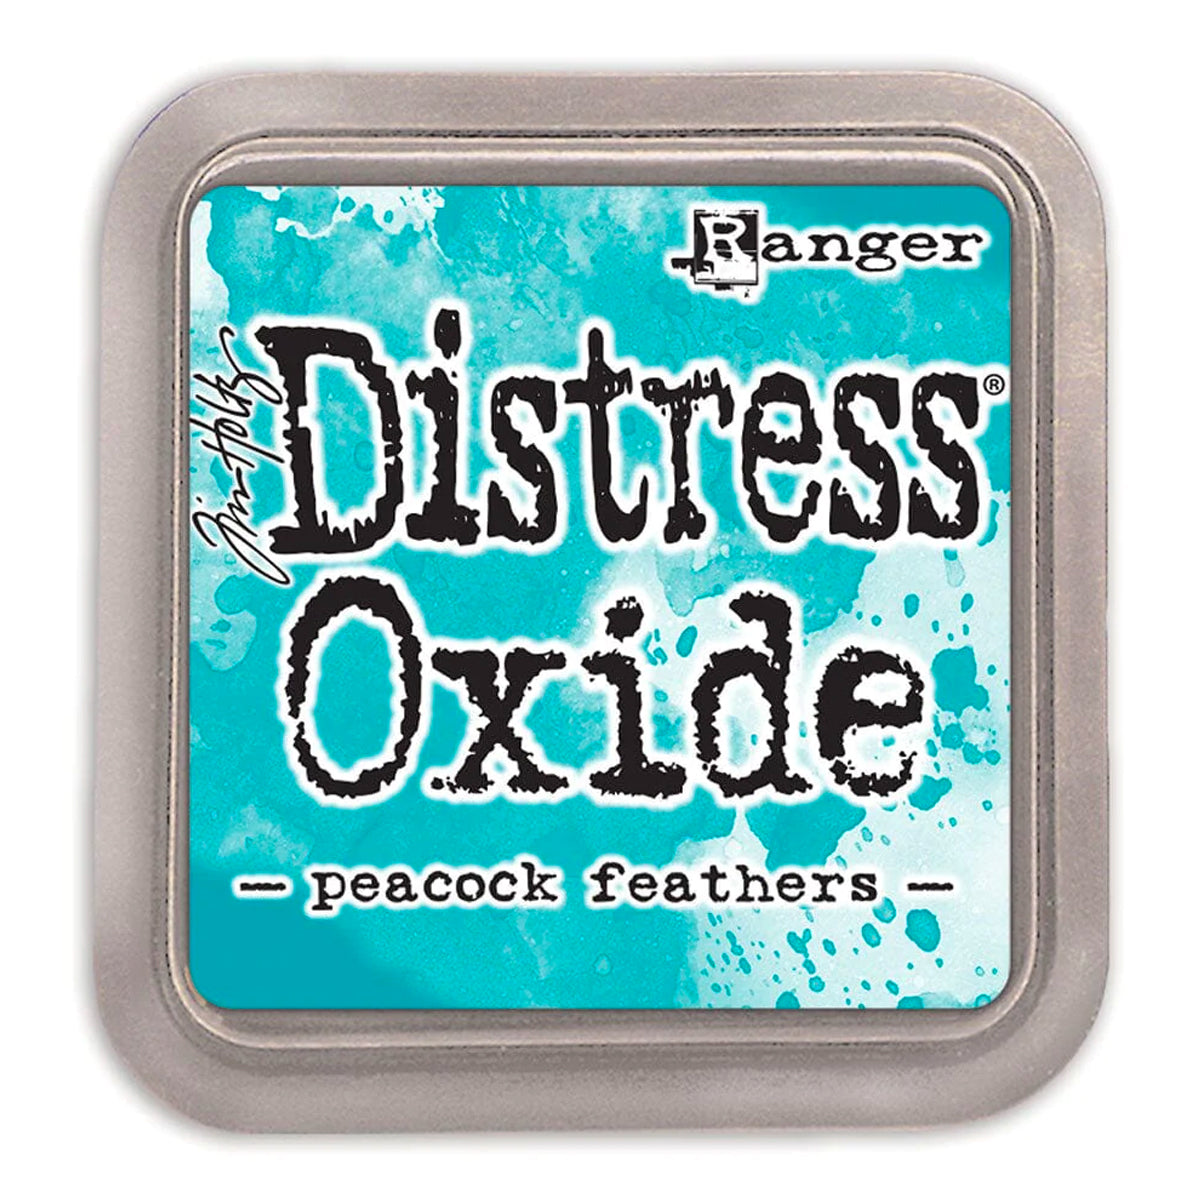 Tim Holtz Distress Oxide Ink Pad - Peacock Feathers